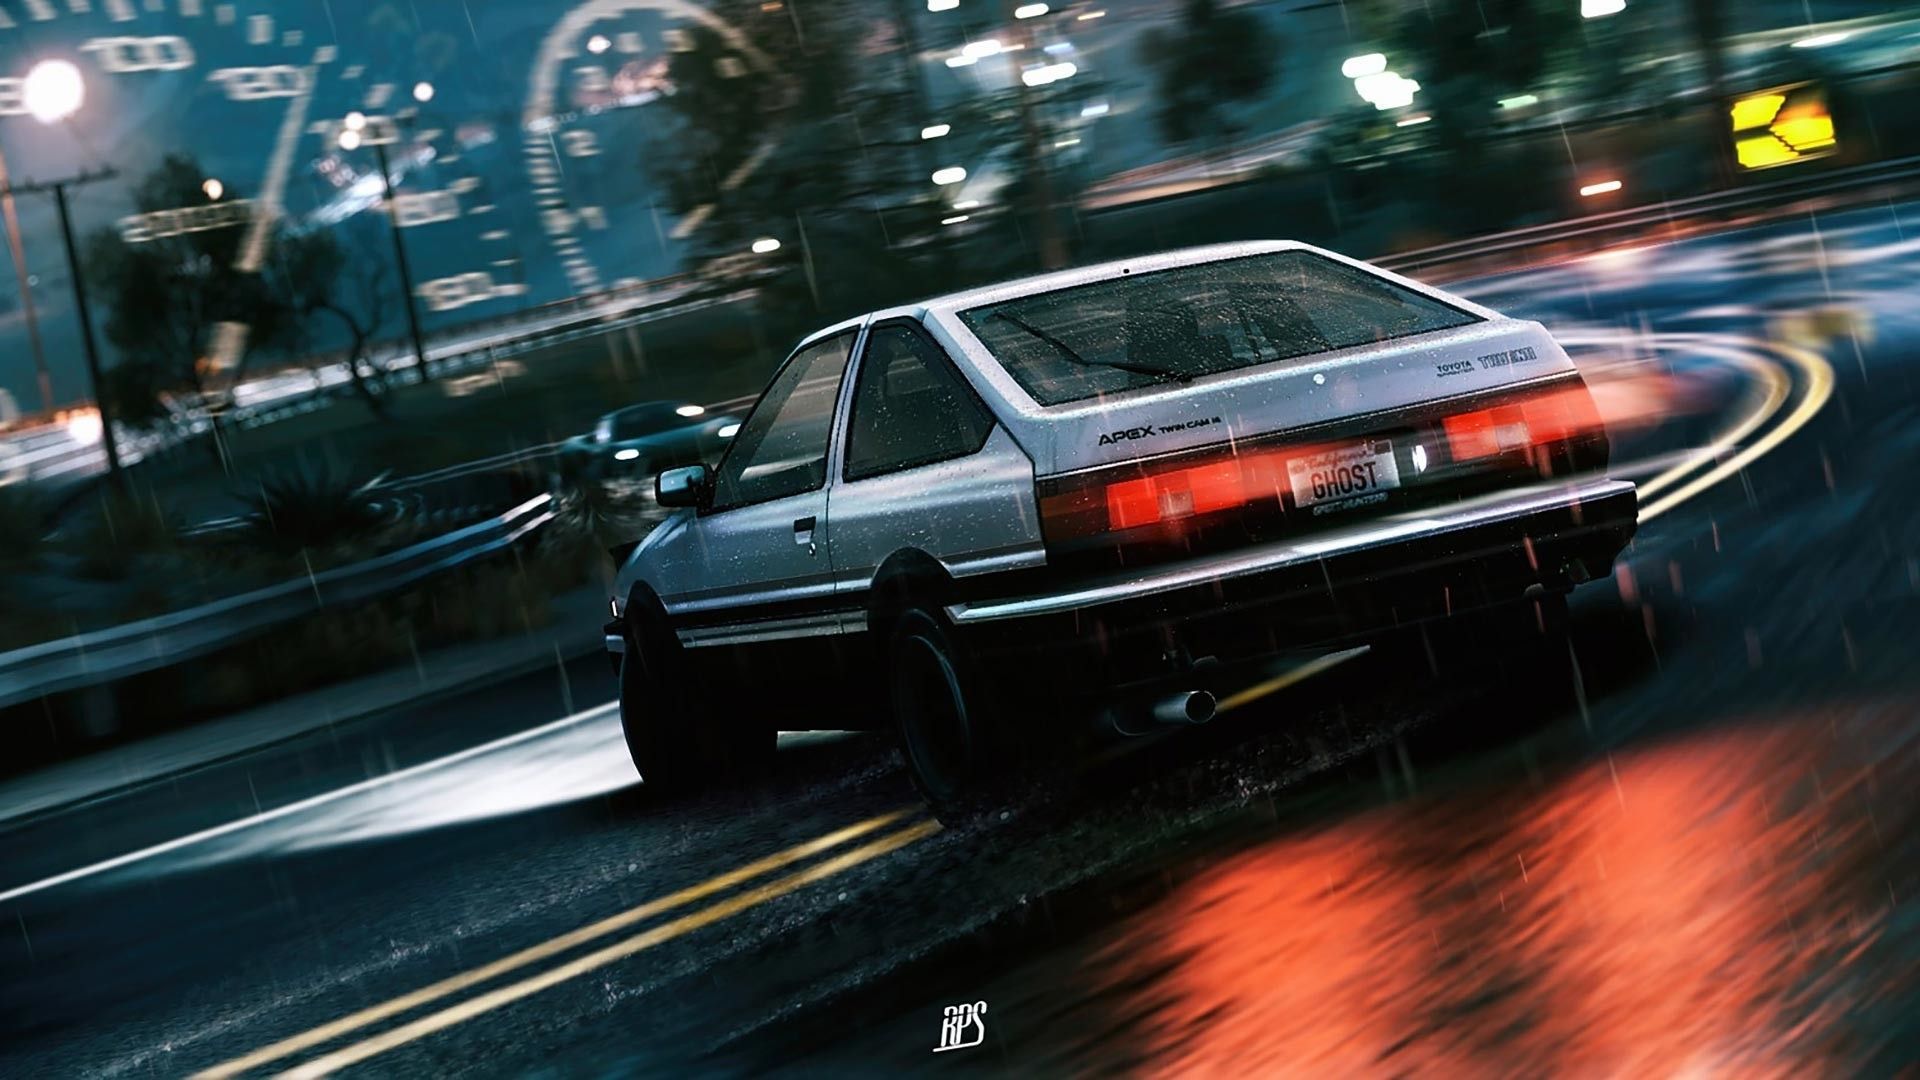 Are you trying to find Initial D Wall Paper? Below are 10 top and newest Initial D Wall Paper for desktop computer wi. Initial d, Full HD wallpaper, Jdm wallpaper